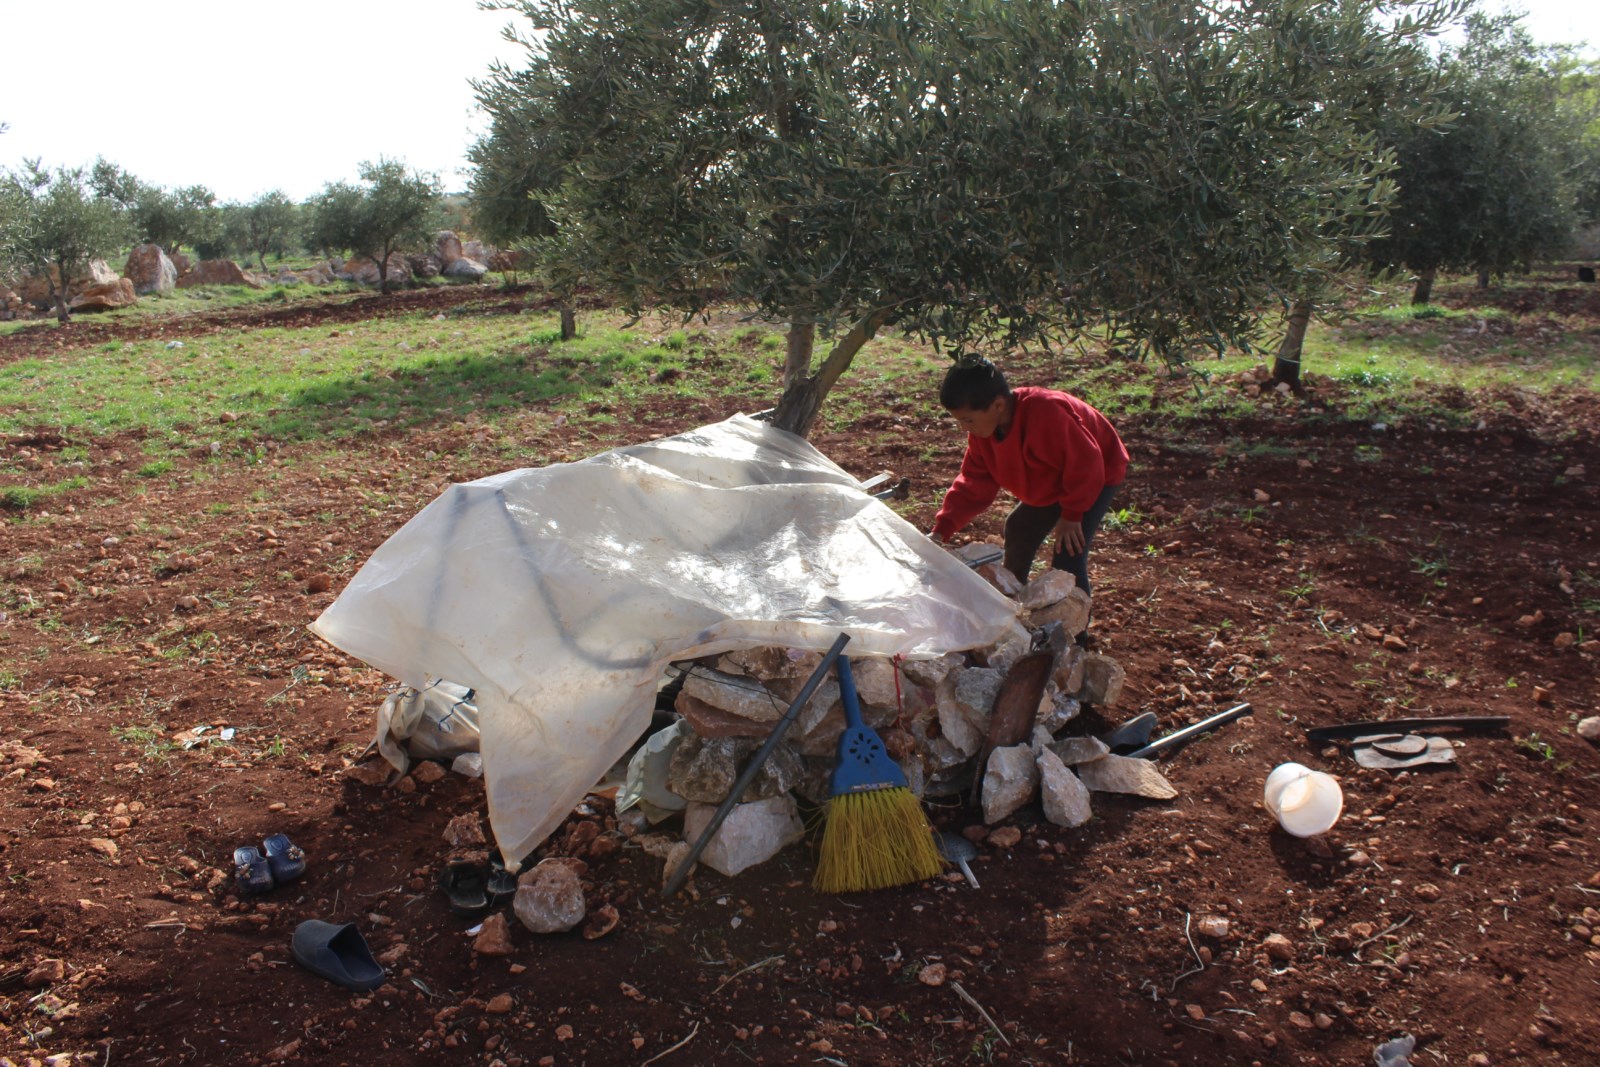 Afrini child was forced to displace, built house under olive tree